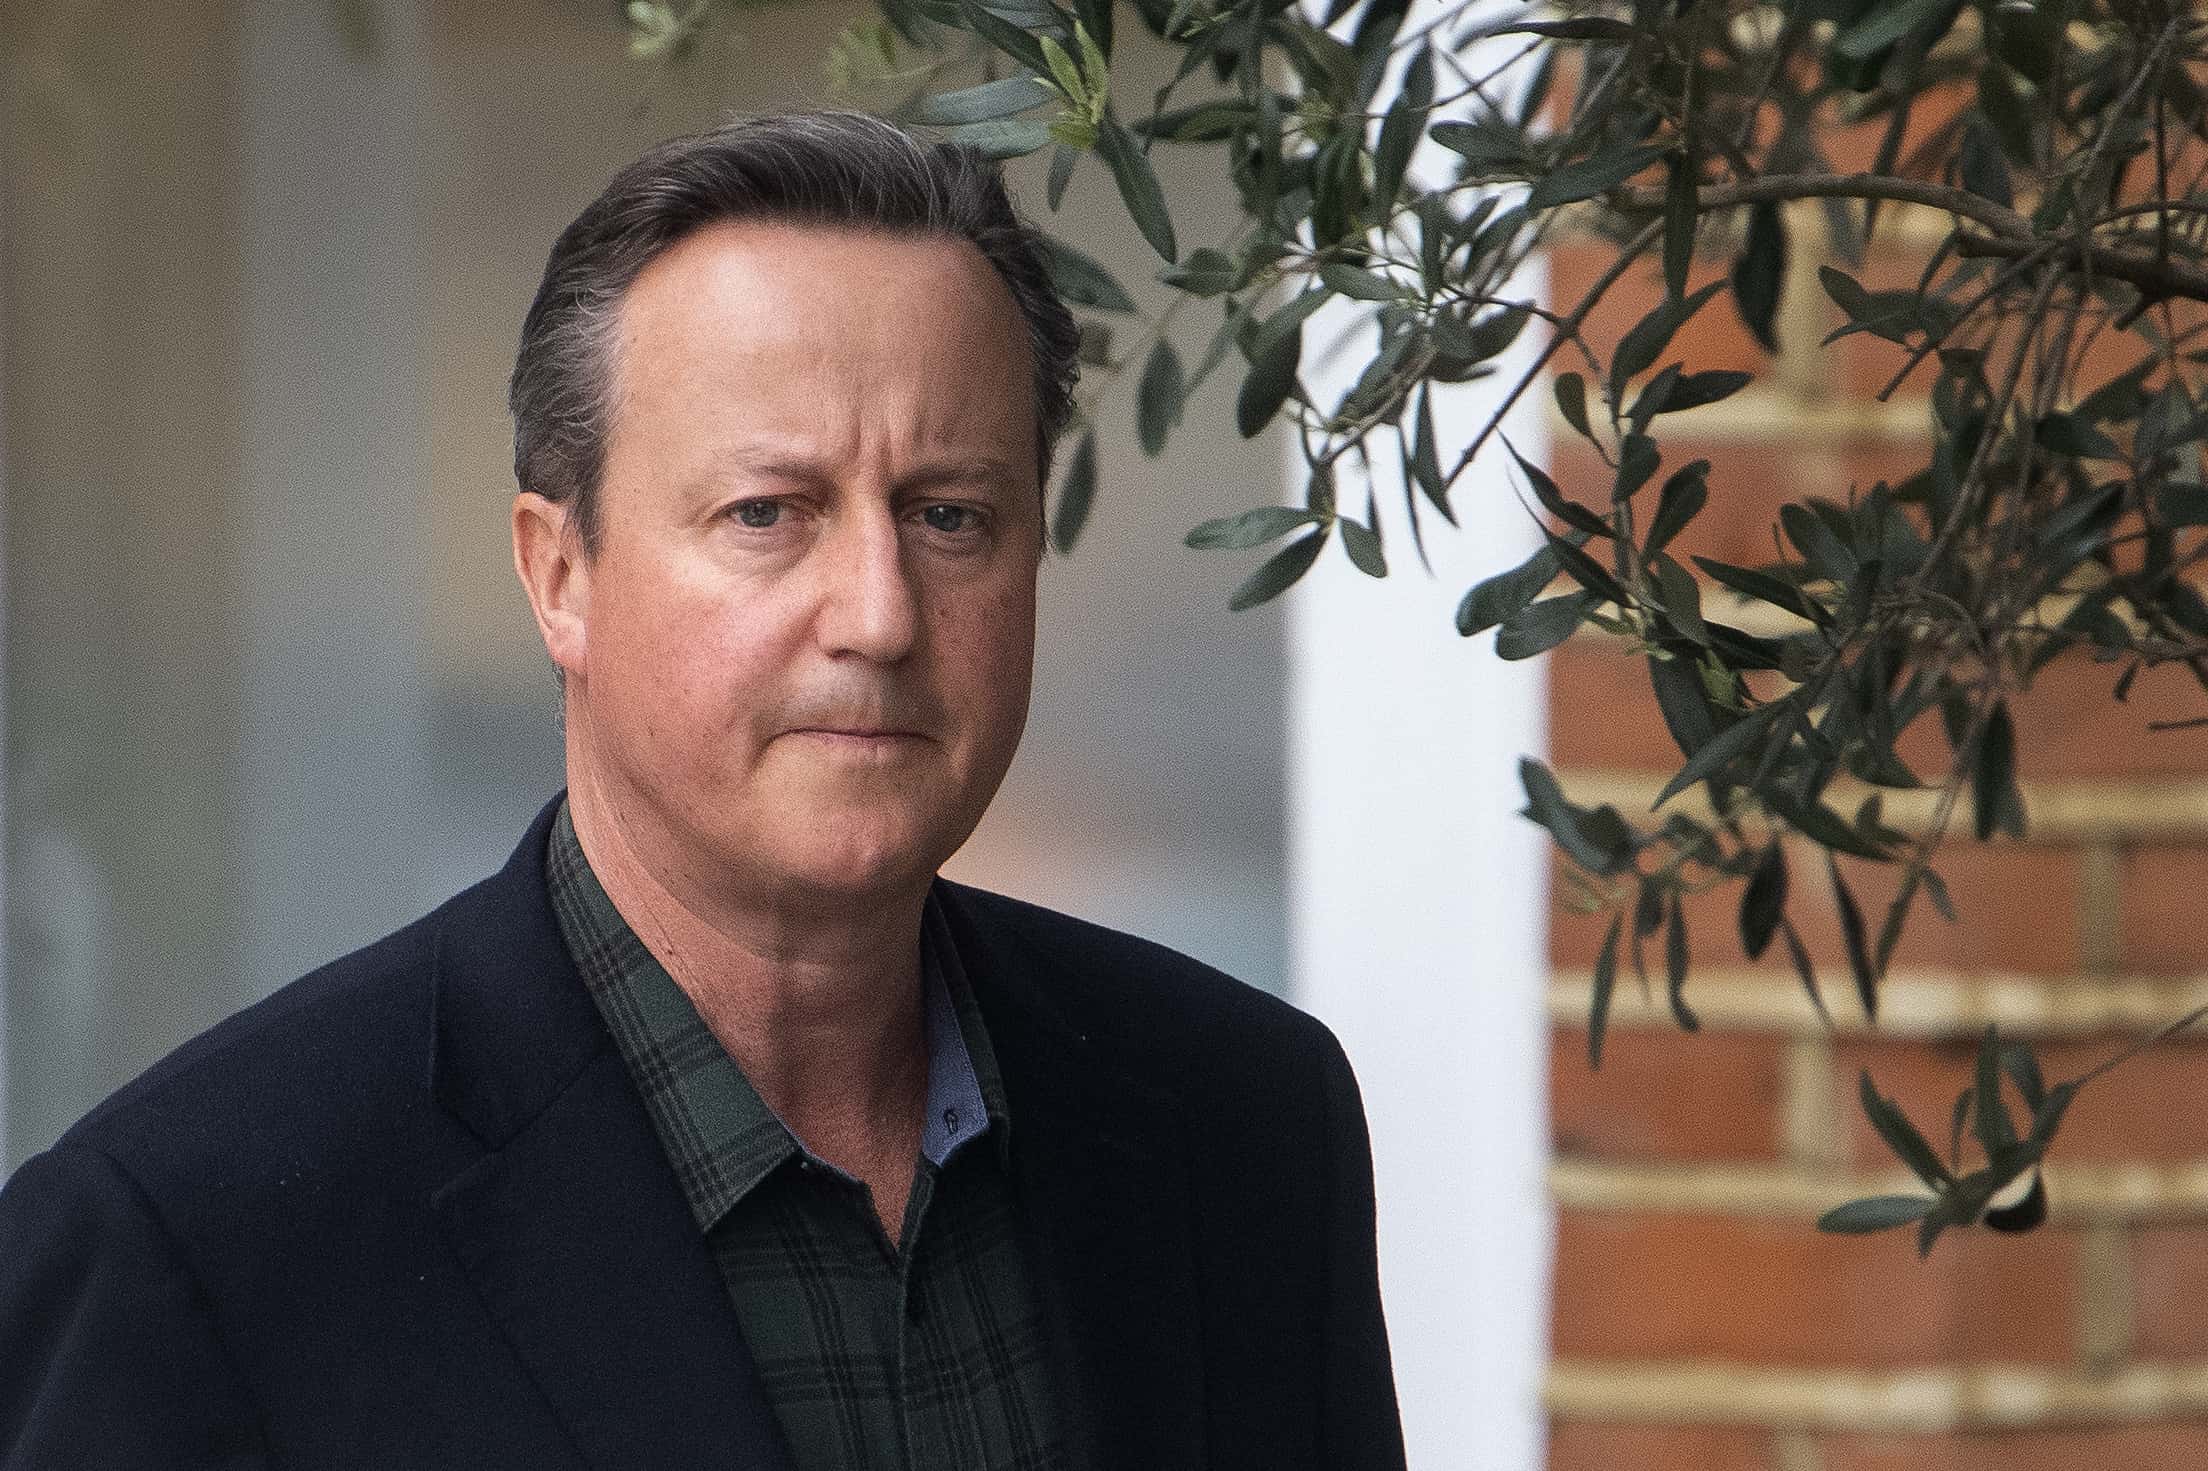 Cameron gets the meme treatment after he’s spotted in dubious attire